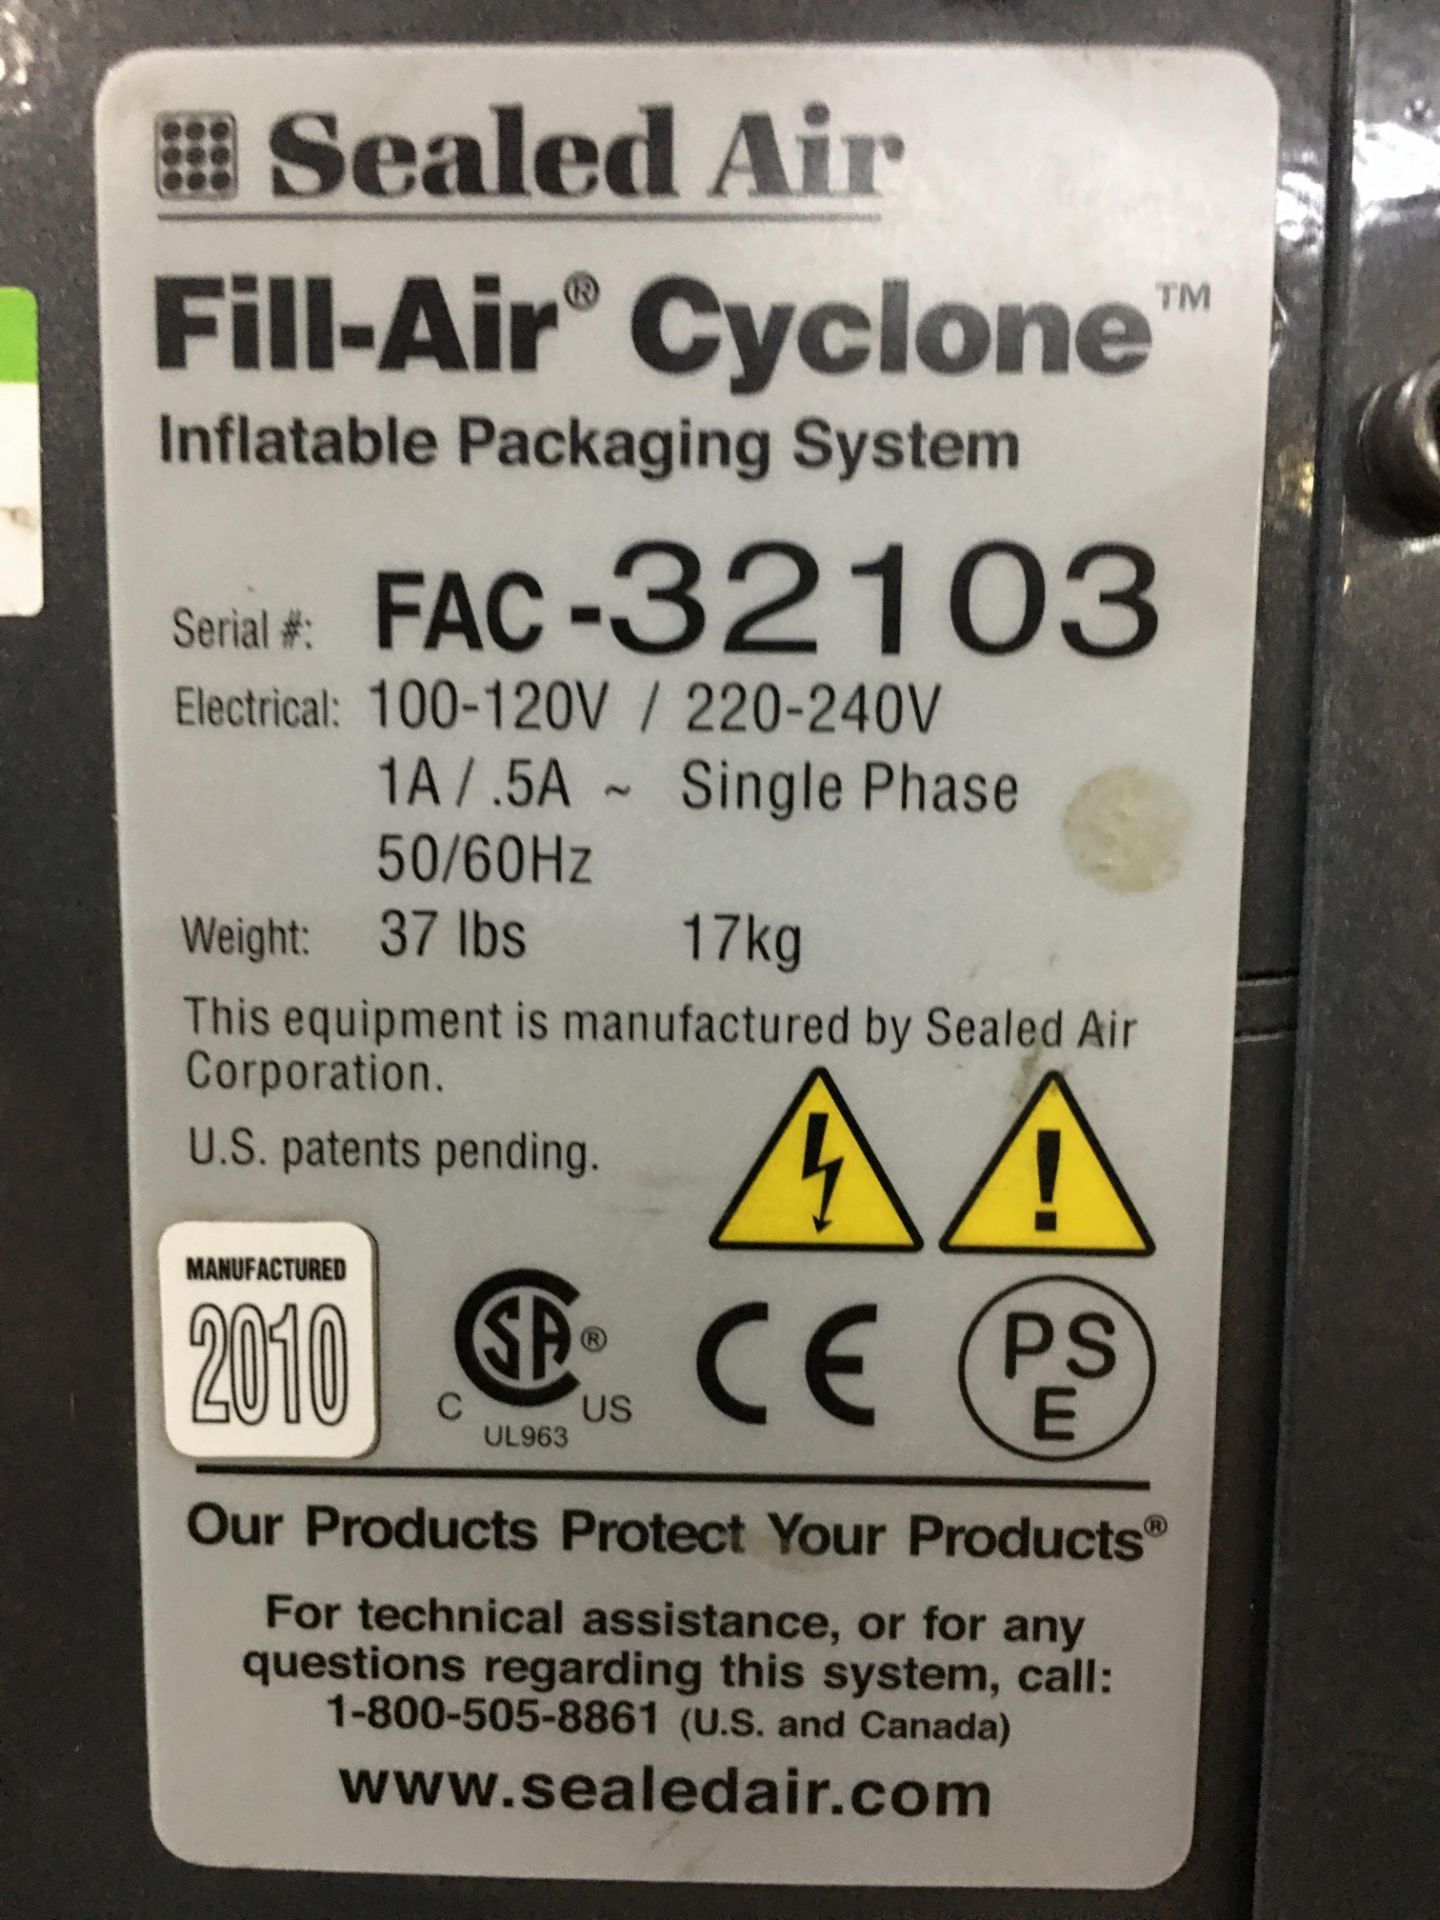 Sealed Air Fill-Air Cyclone Inflatable Packaging System - Image 4 of 4